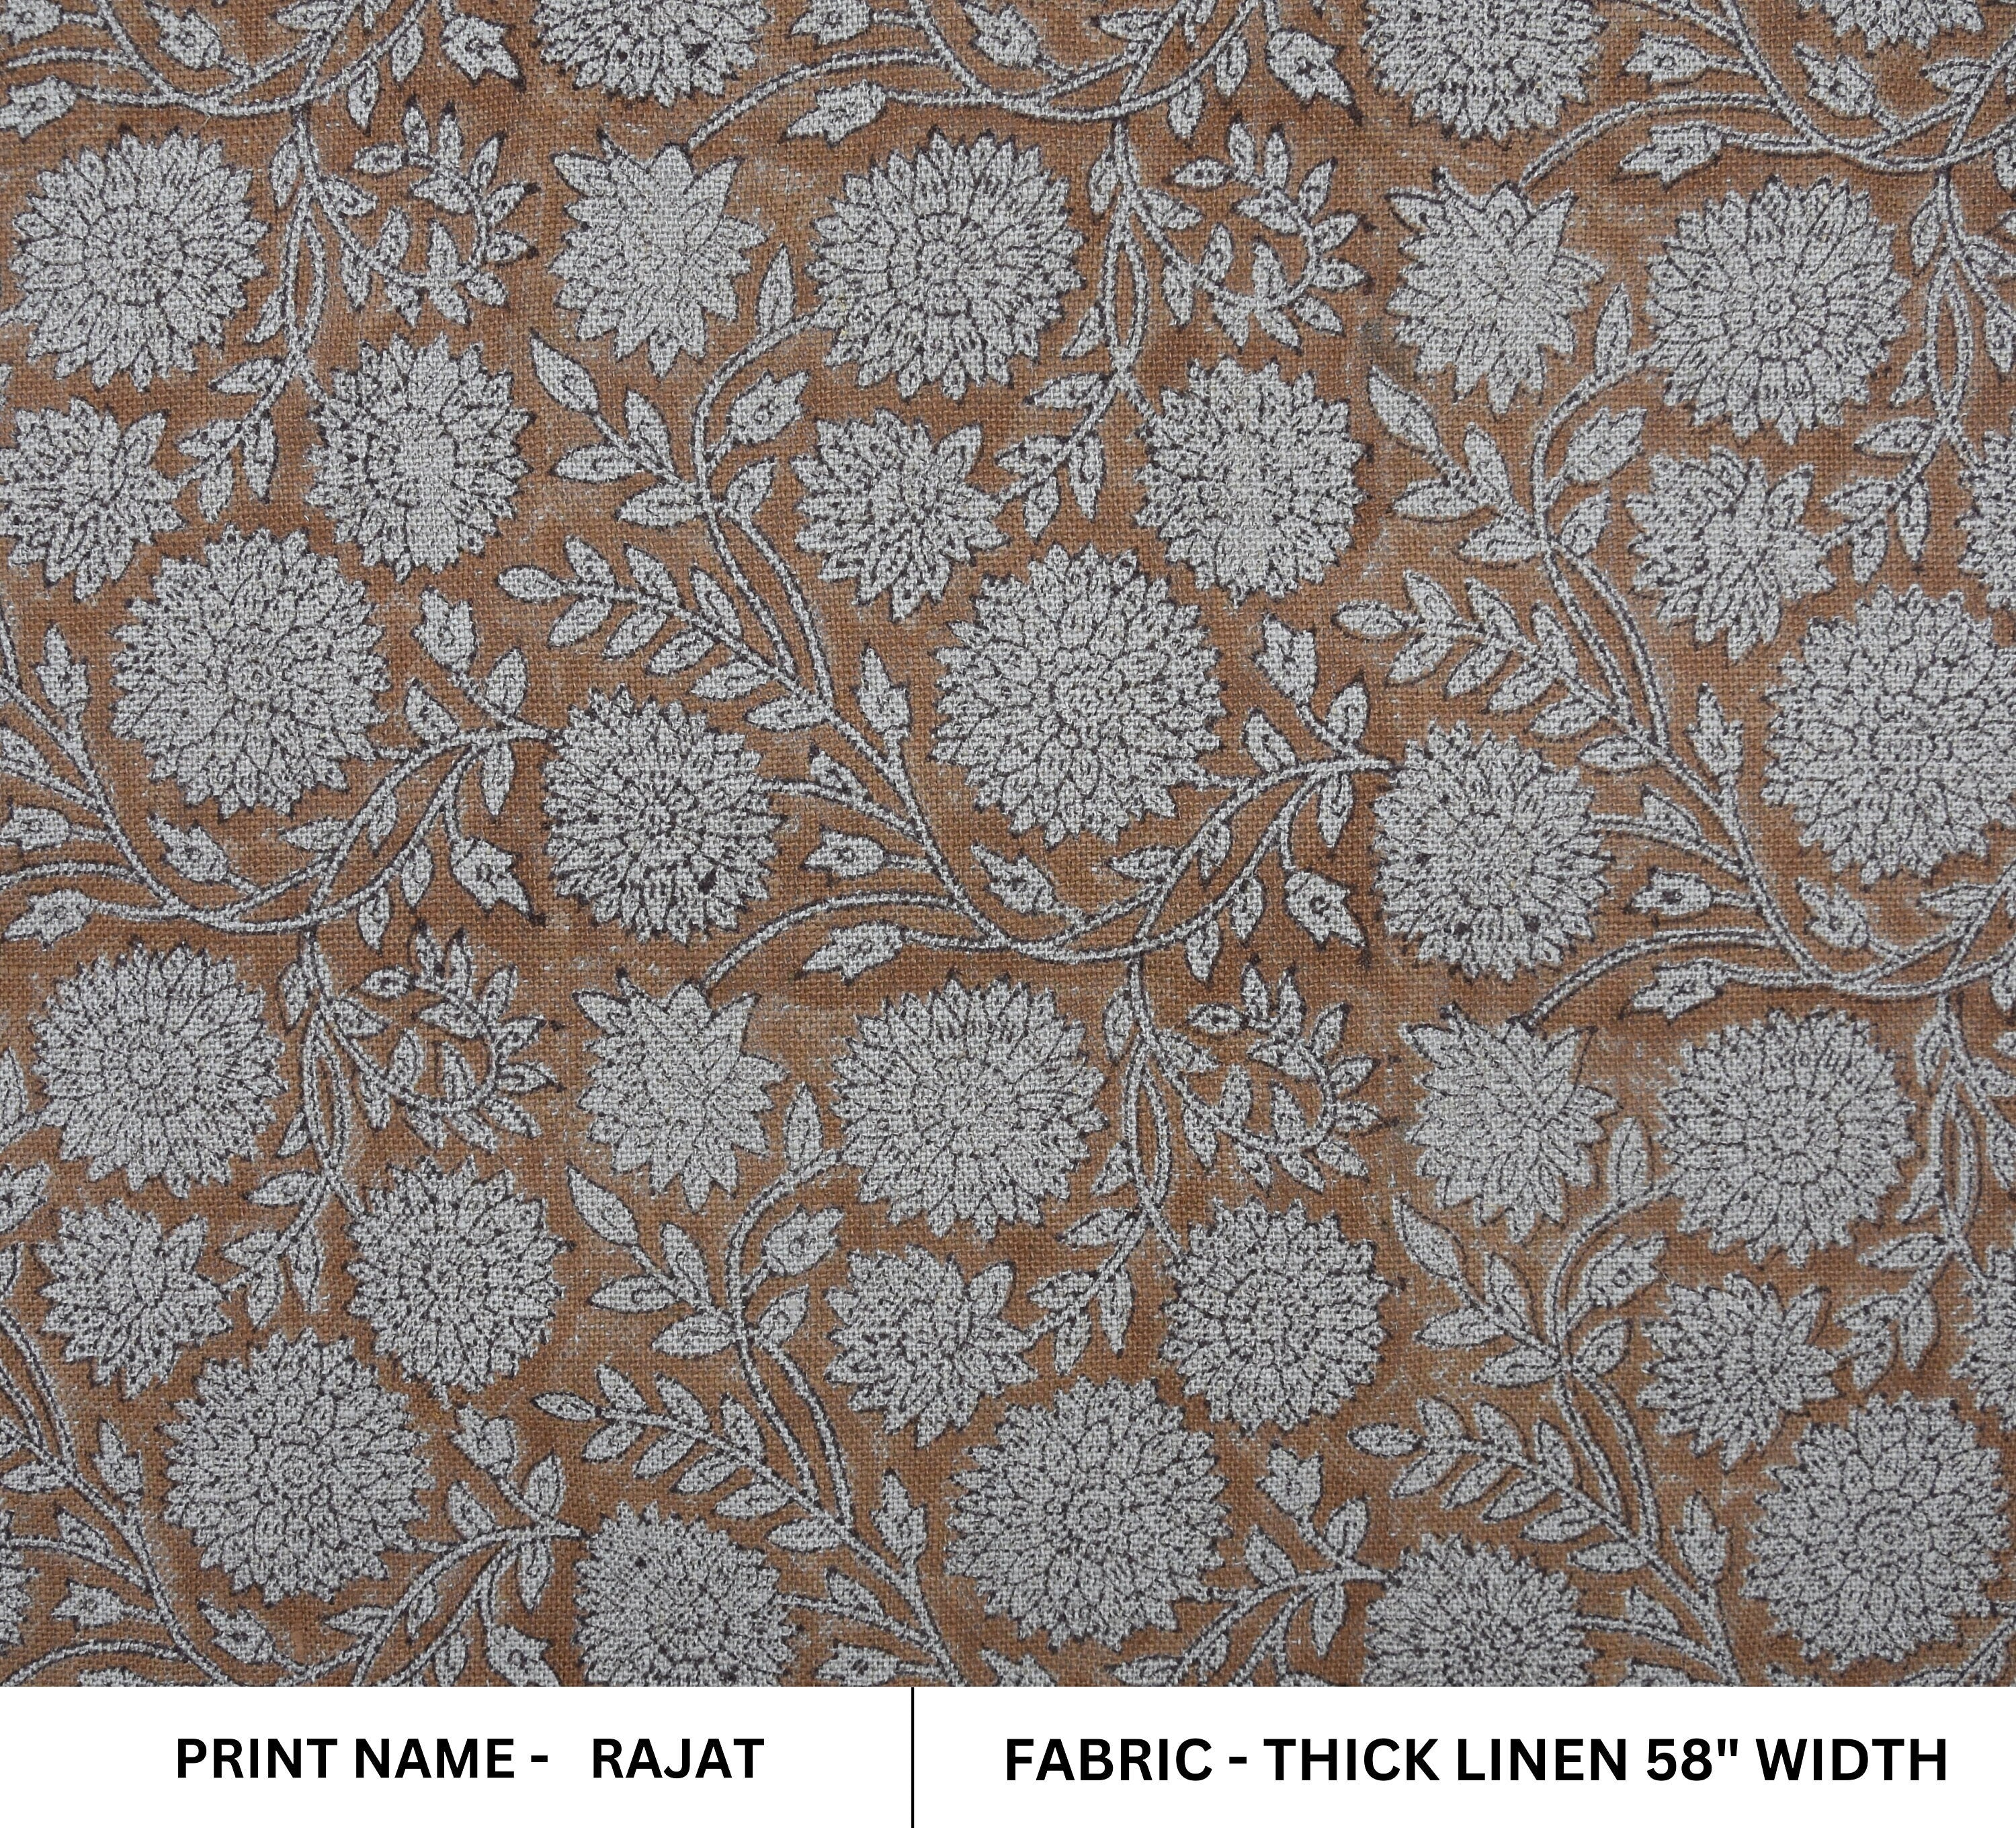 Hand Block Print Thick Linen 58" Wide, Table Curtain Cover, Genuine Fabric, Brown Floral, Indian Cushion Cover - Rajat